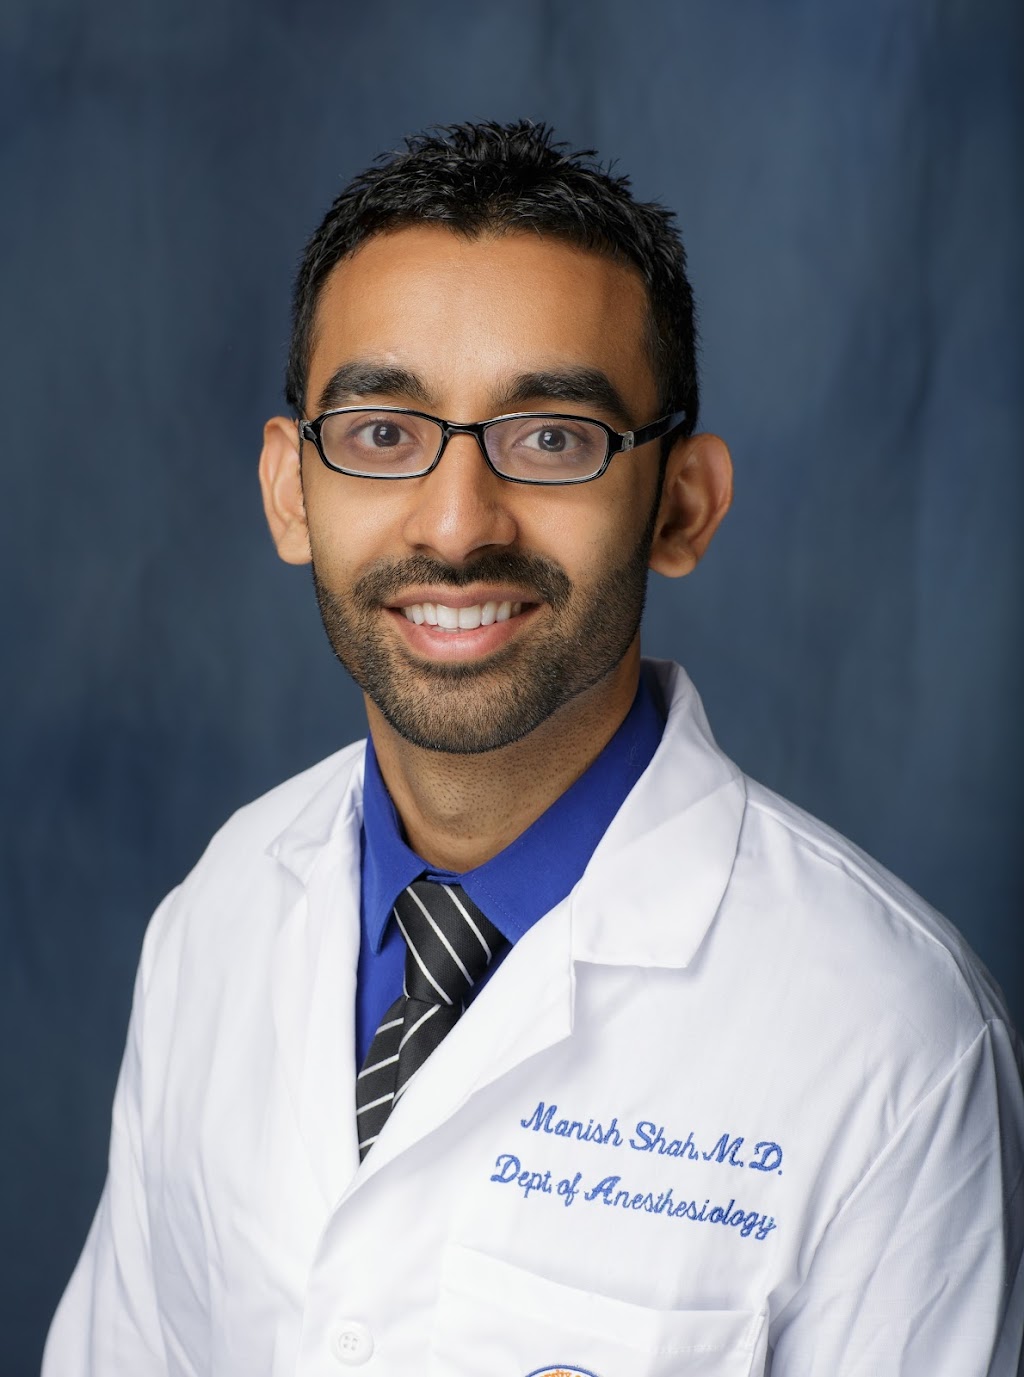 Manish Shah, MD | 410 W Linfield-Trappe Rd Suite 120, Limerick, PA 19468 | Phone: (855) 235-7246